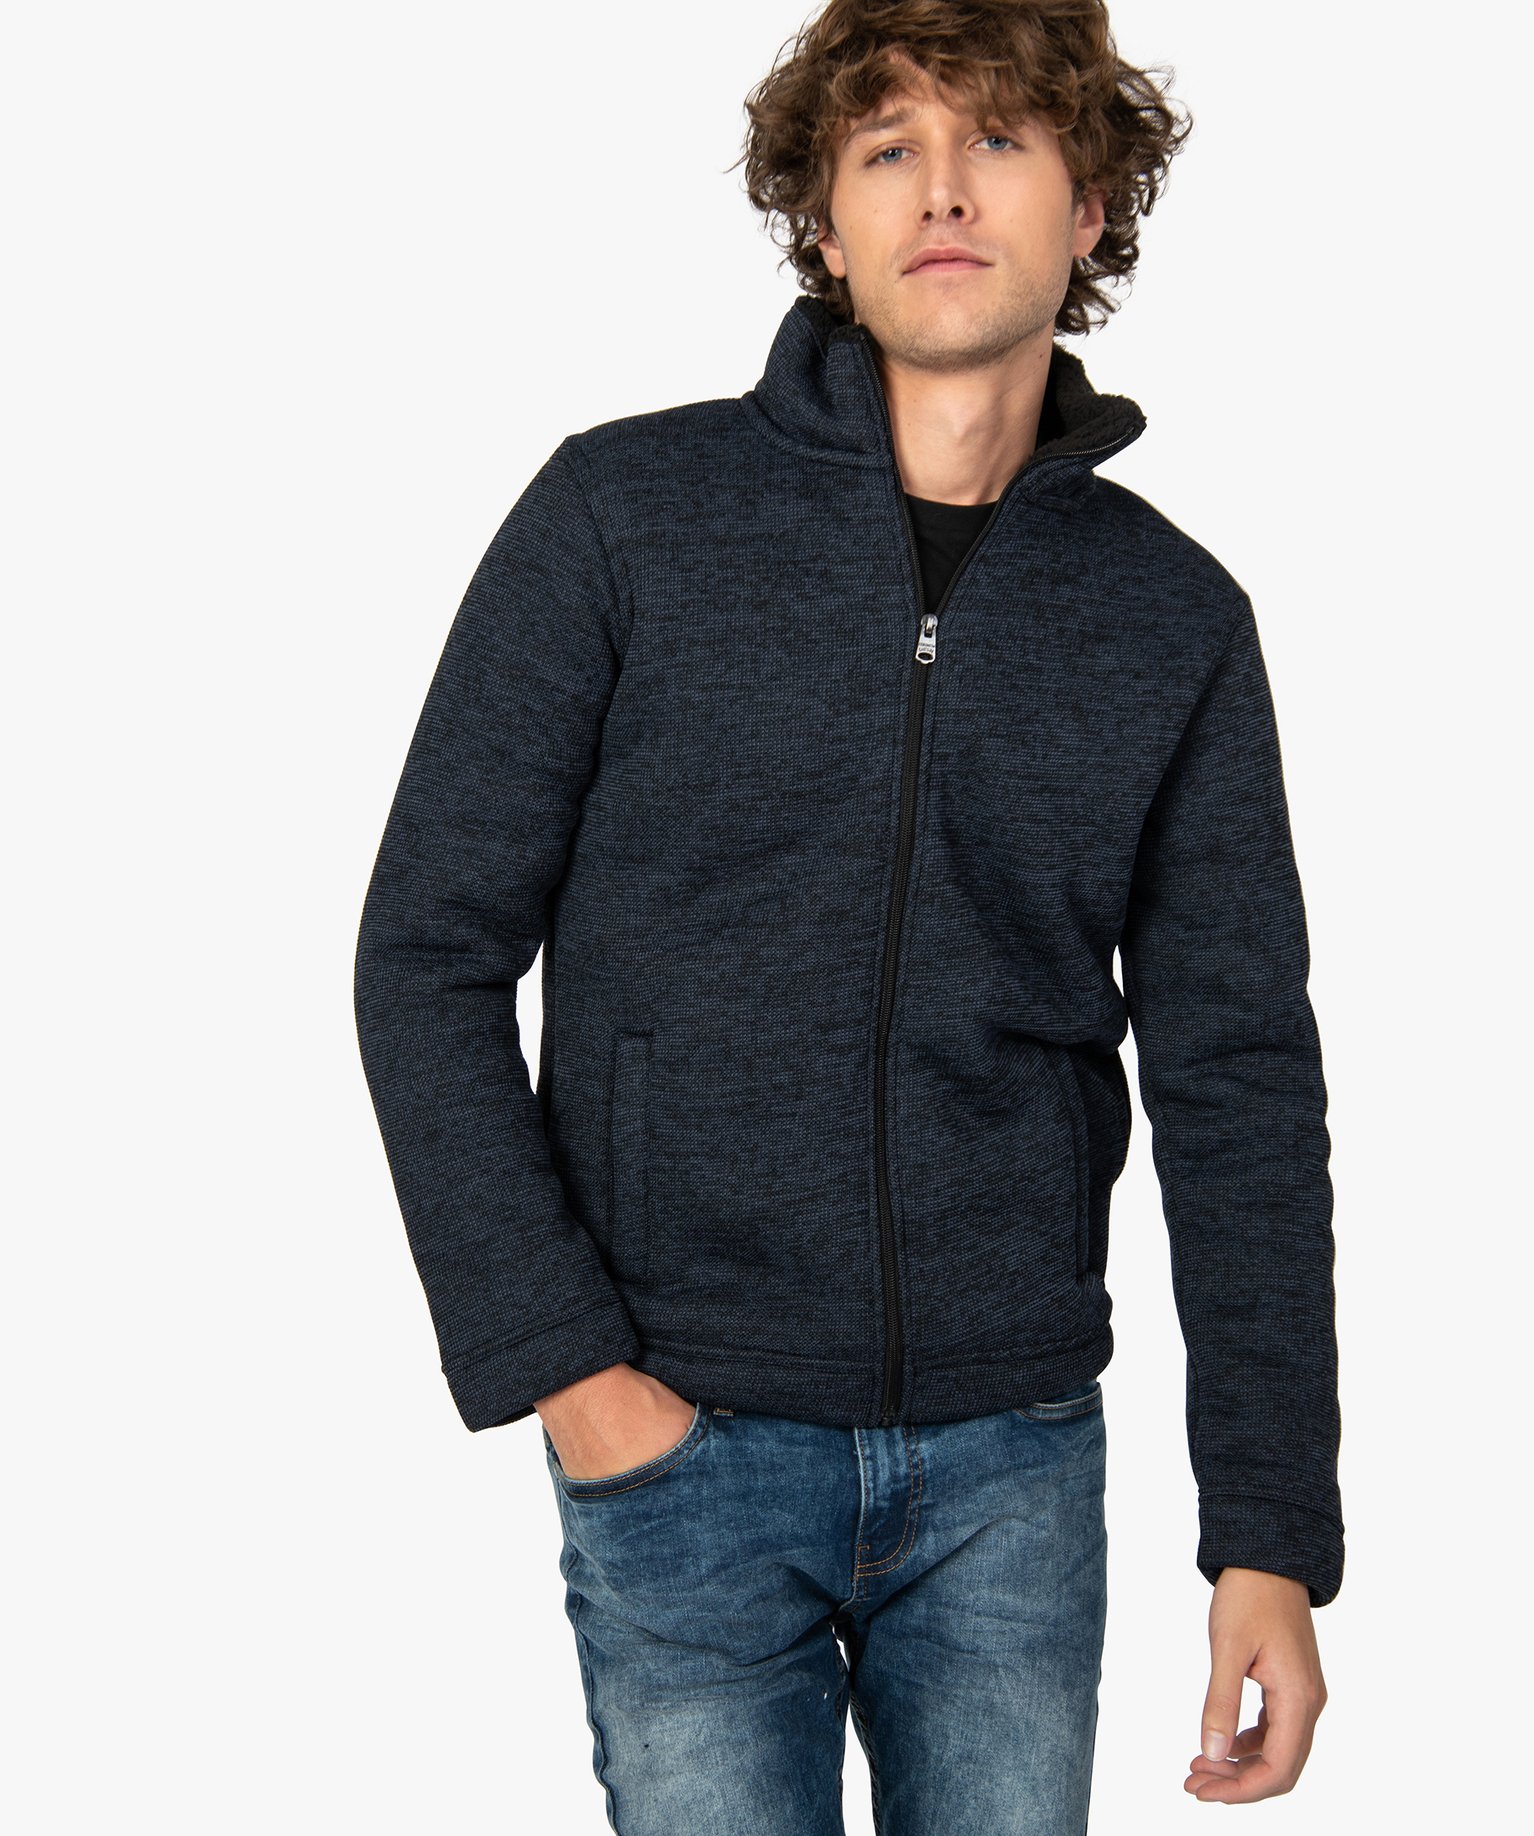 gilet doublé sherpa homme